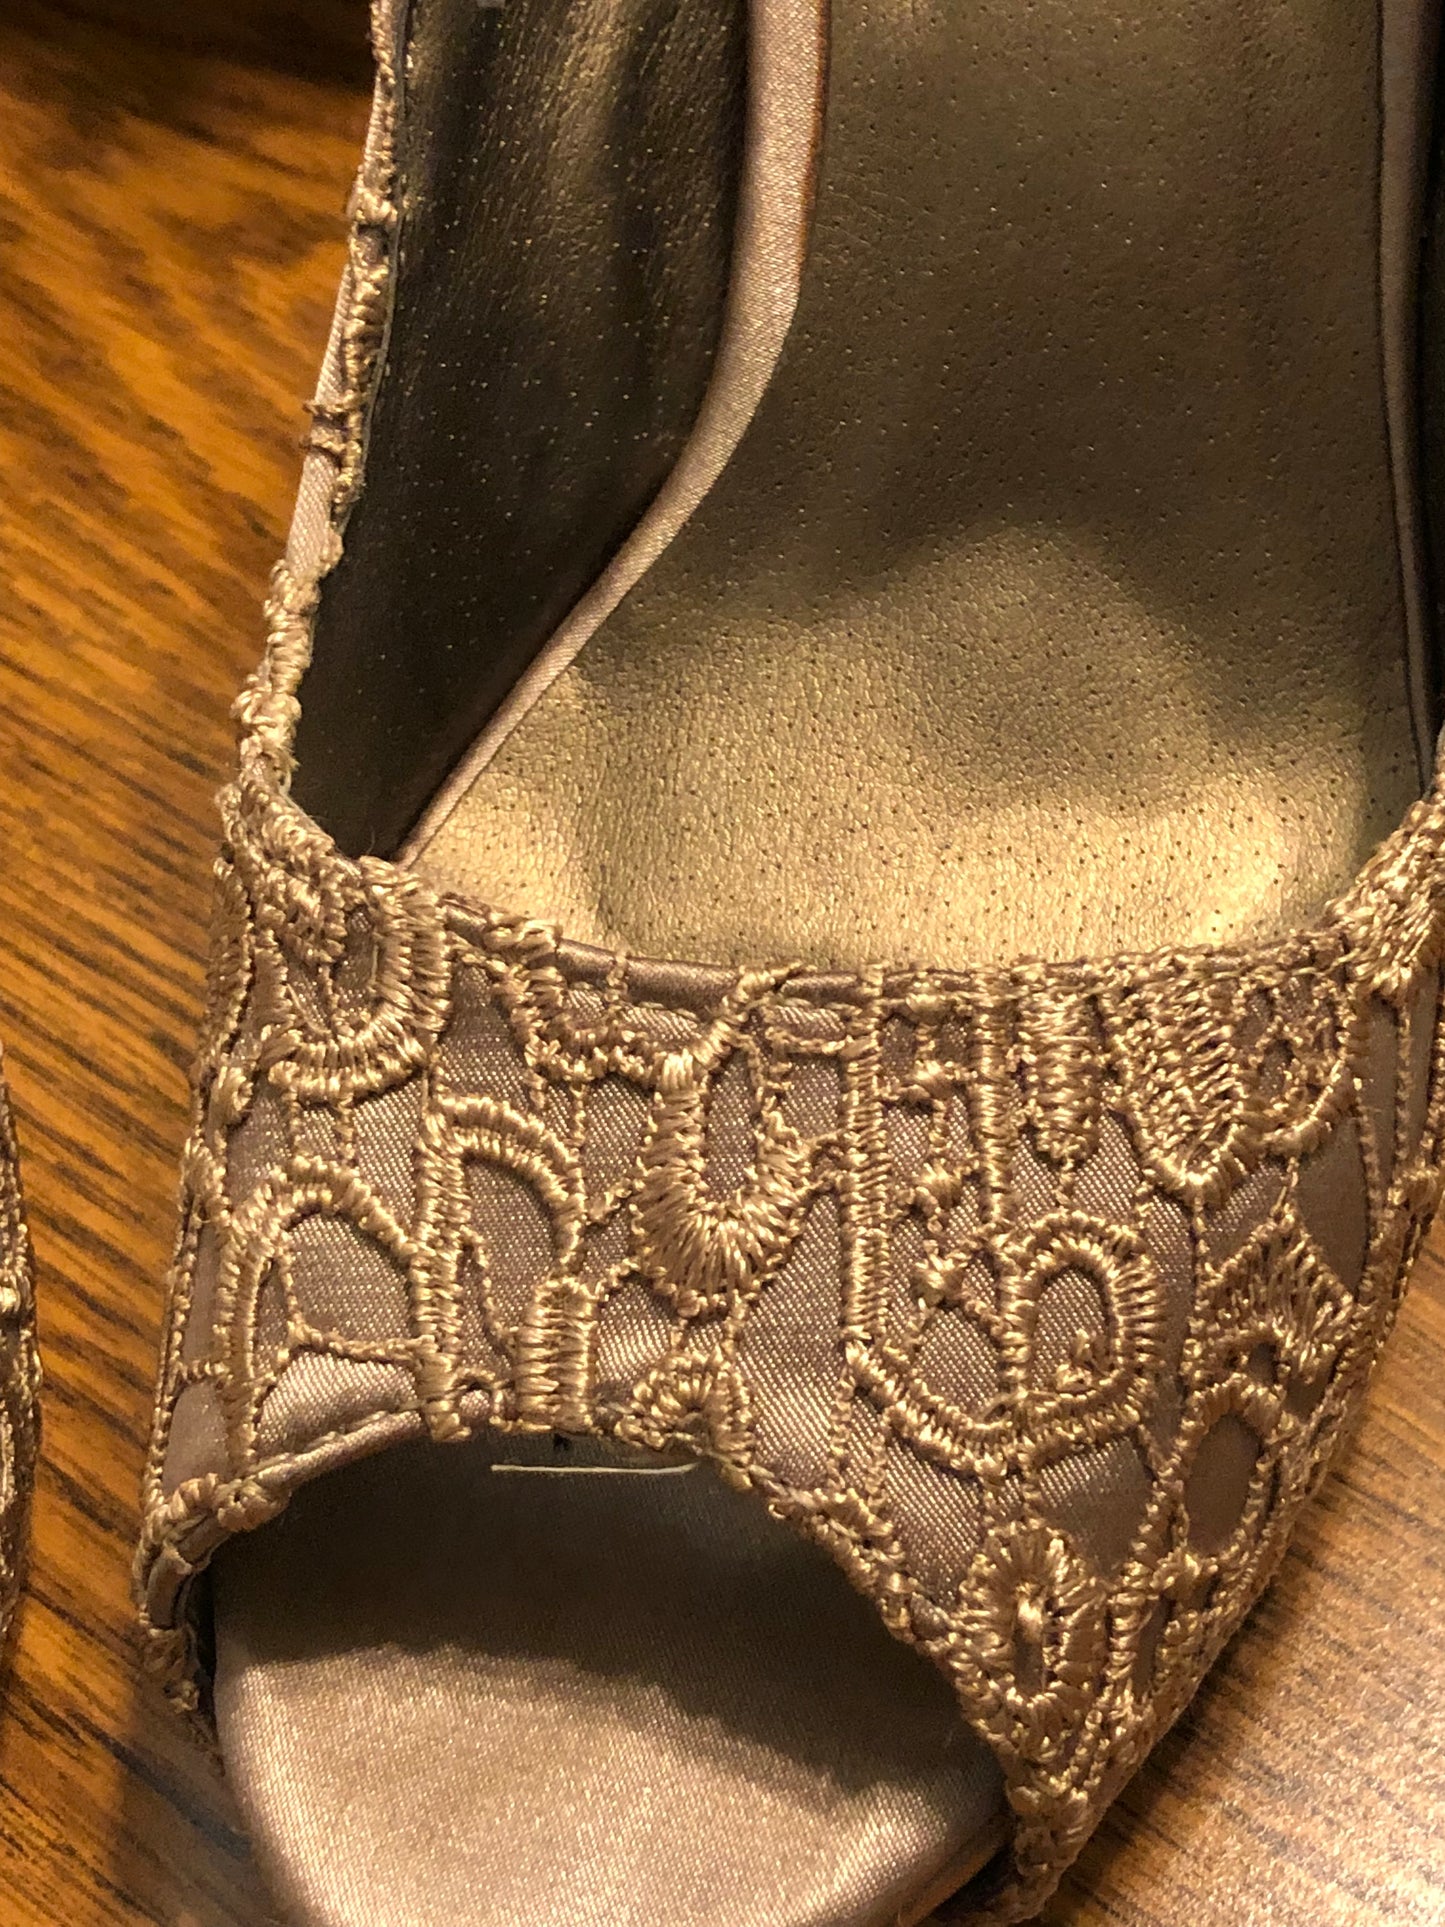 Gold Embroidered Heels from Paris, US Size 8 - Used